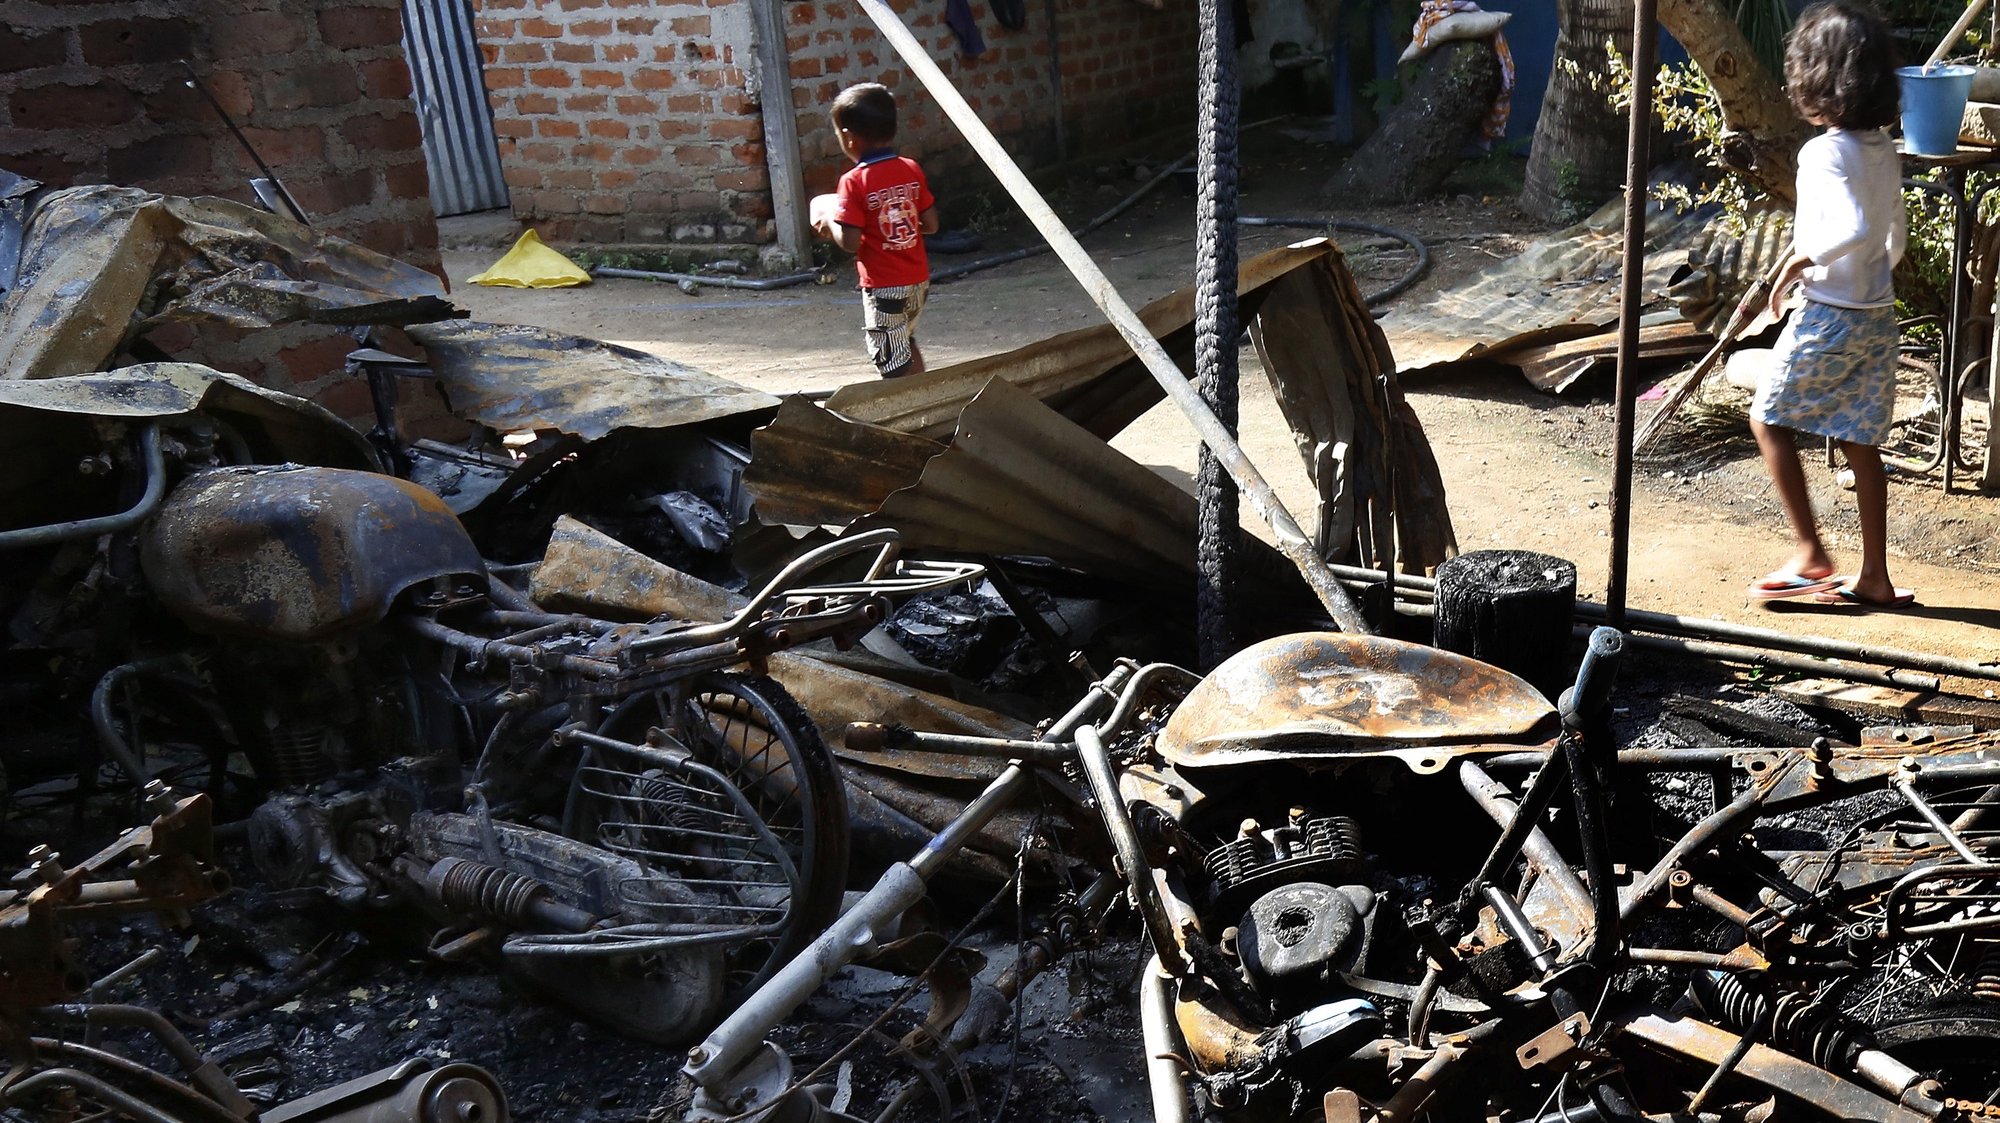 epa07569790 Sri Lankan children pass near the burnt vehicles Hettipola area, 86 Kilometers from Colombo, Sri Lanka, 14 May 2019. According to news reports, Sri Lanka authorities imposed a nationwide overnight curfew after outbreak of communal violence and clashes in the aftermath of the deadly series of Easter bombings that killed over 300 people. One person was reportedly stabbed to death during the sectarian attacks, in which mosques and Muslim-owned shops were targeted.  EPA/M.A.PUSHPA KUMARA